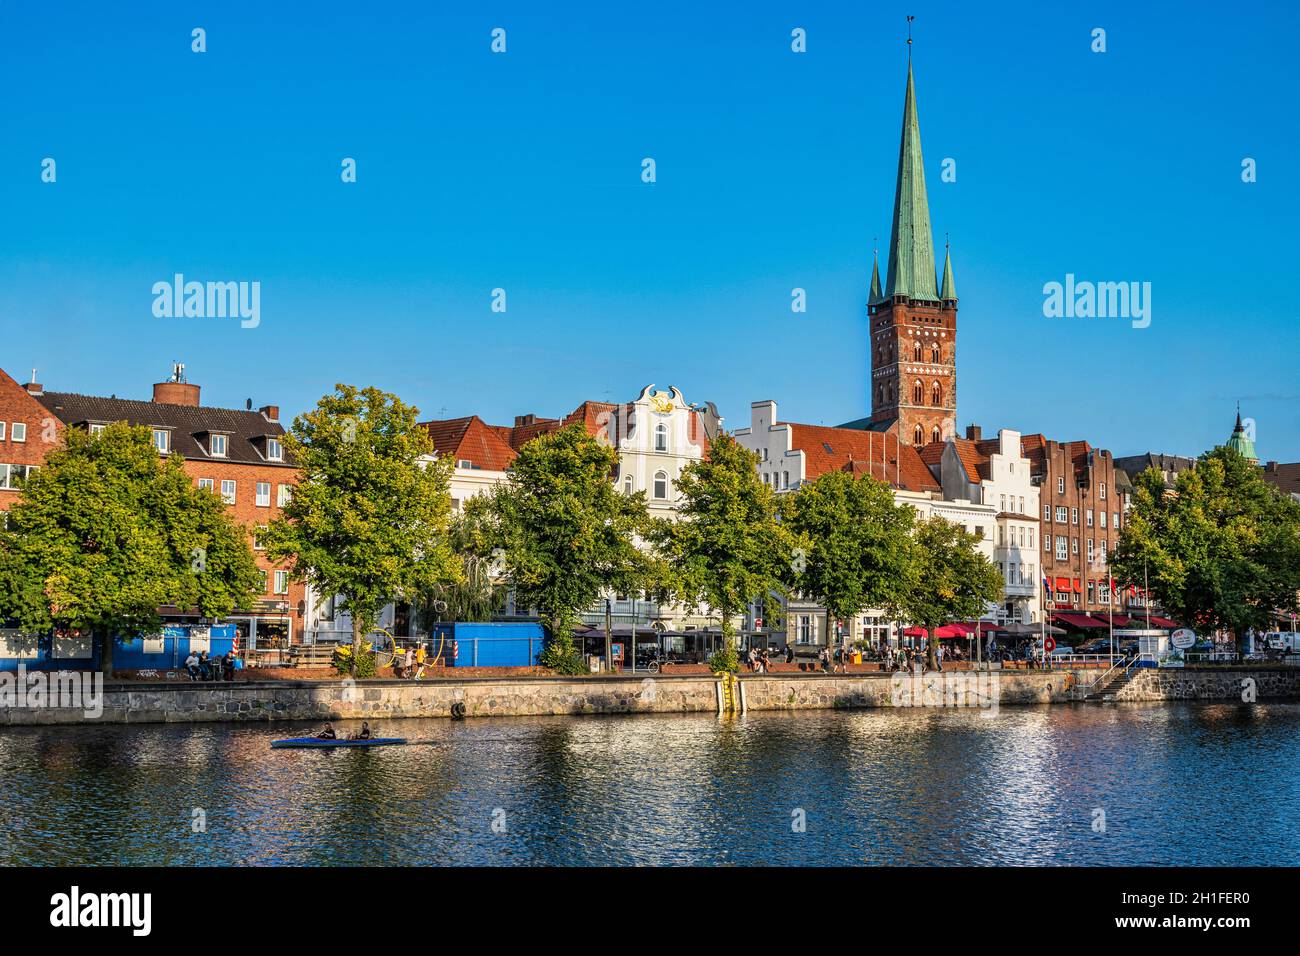 Typical houses of the city of Lübeck overlooking the river Trace. The bell tower of the church of San Pietro rises above the roofs of the houses. Stock Photo